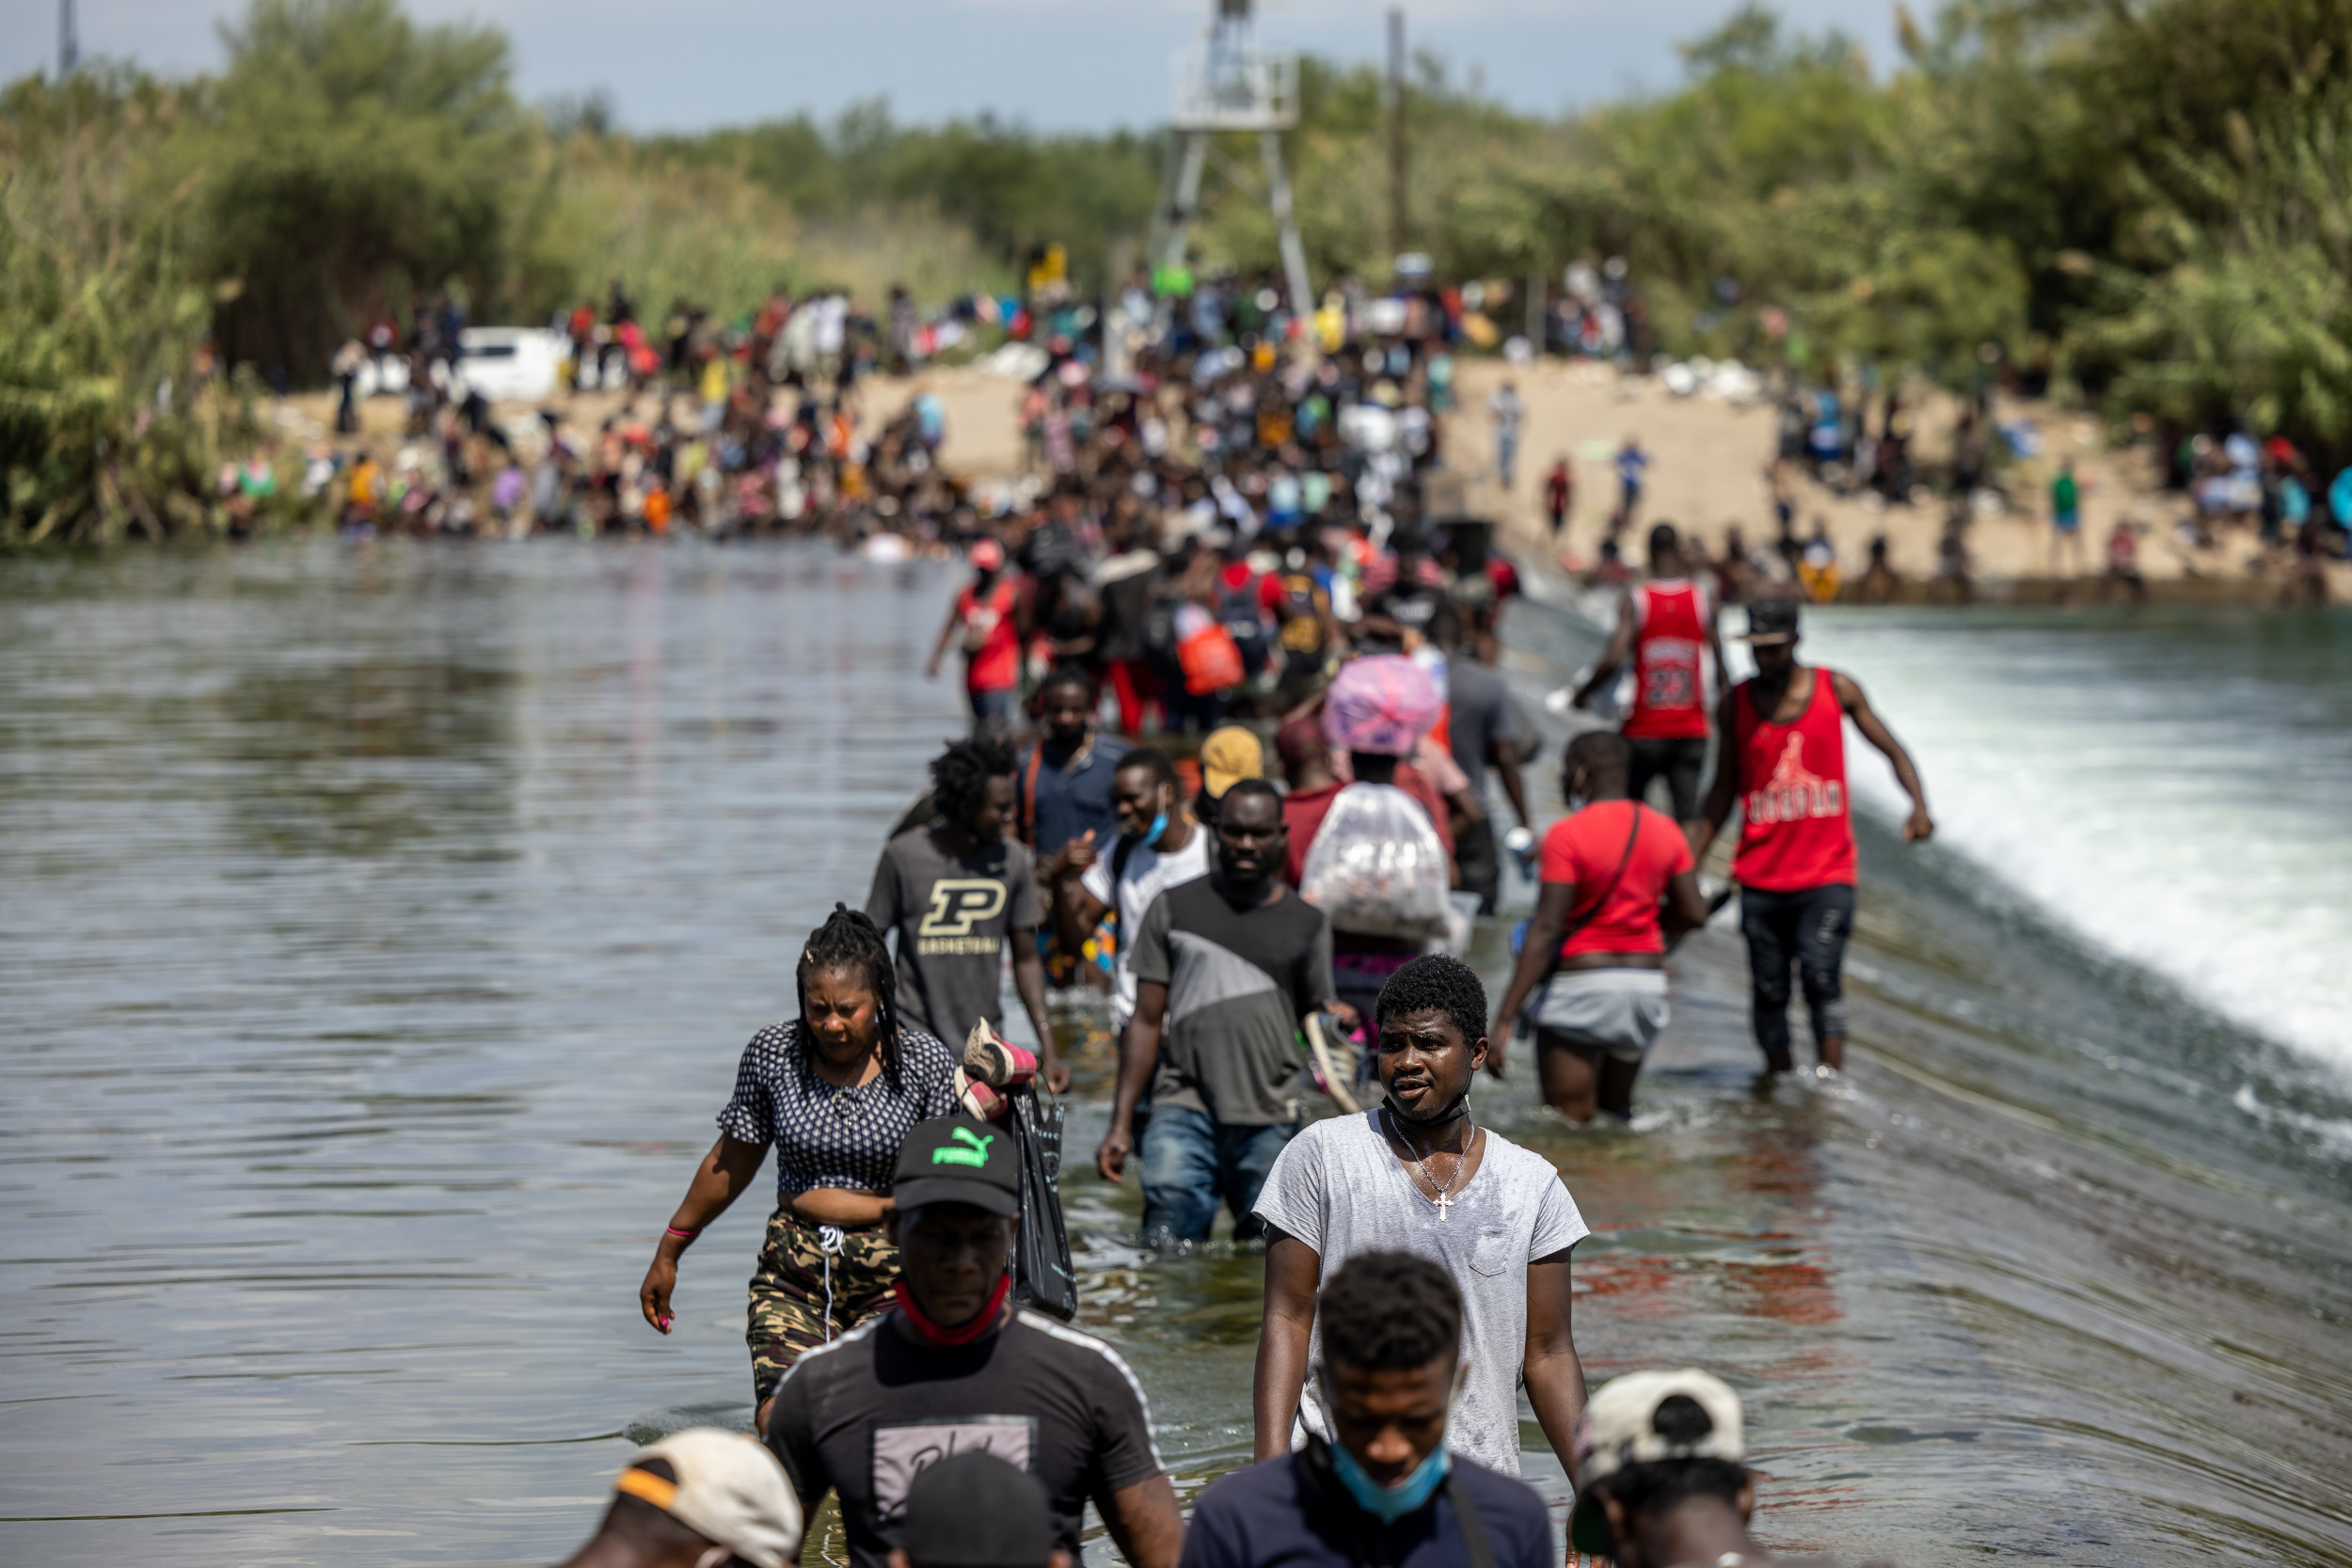 Texas Using Boats Lined Up On Rio Grande To Stop Flow Of Migrants